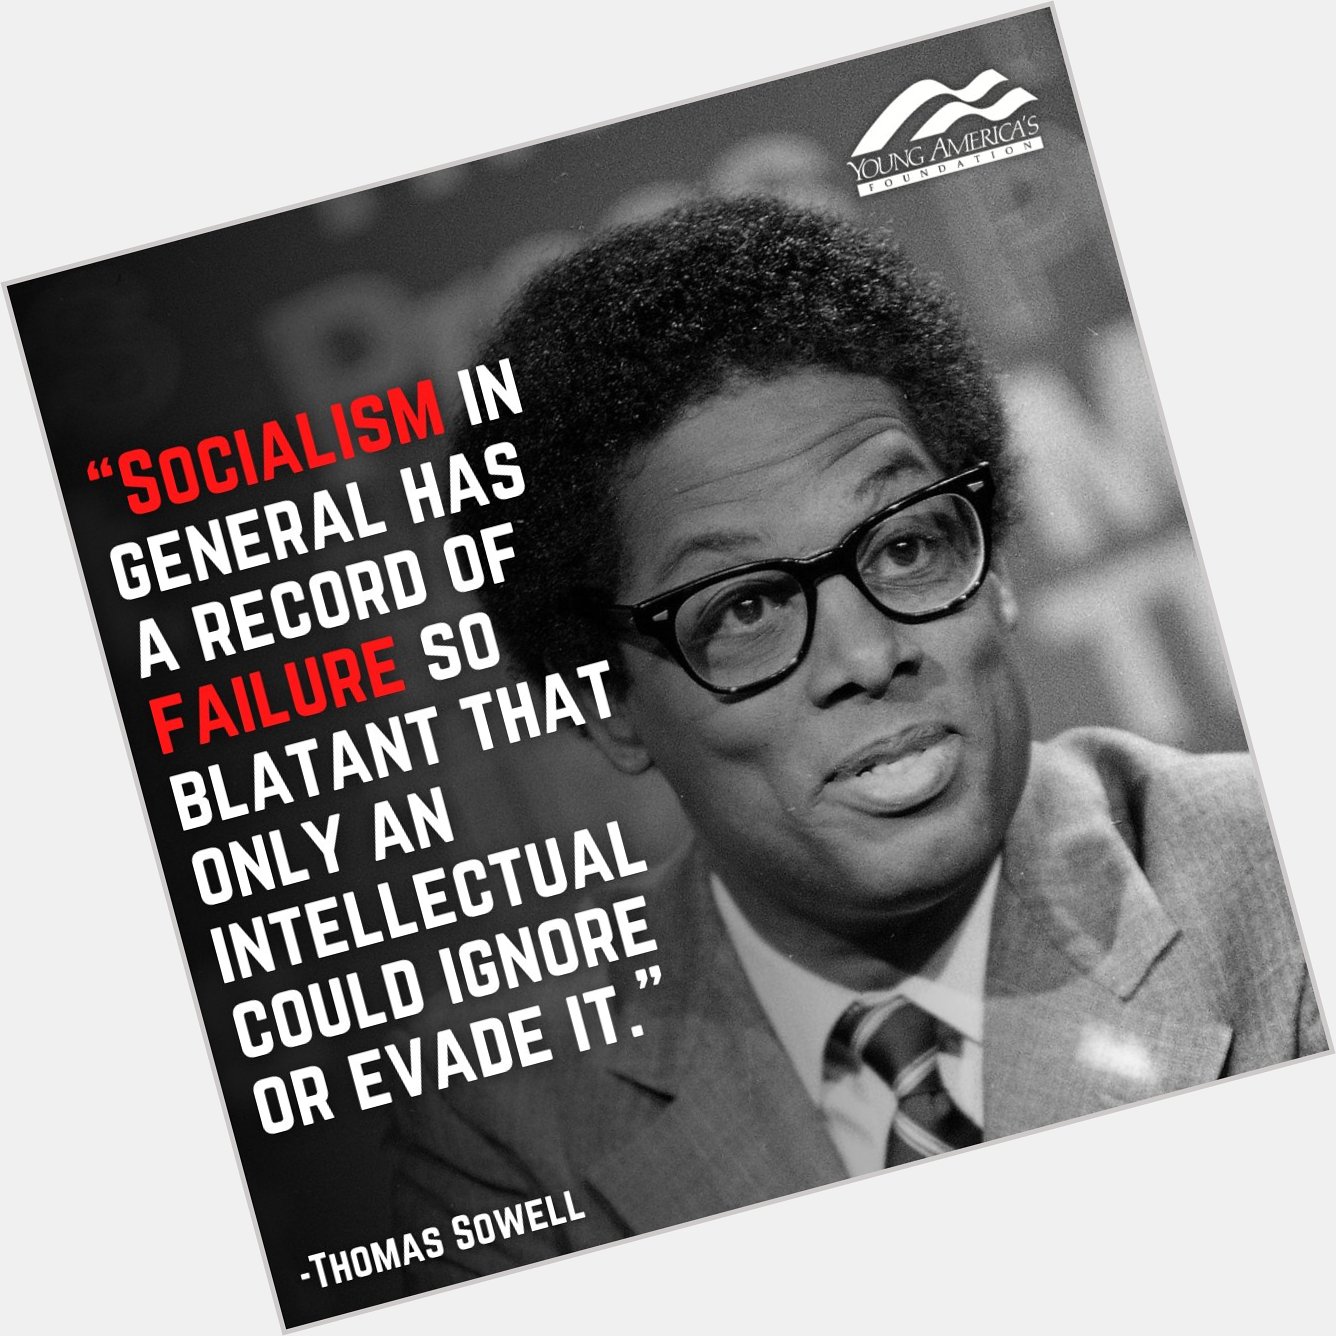 Happy 91st birthday to one of the greatest minds in economics, Thomas Sowell! 